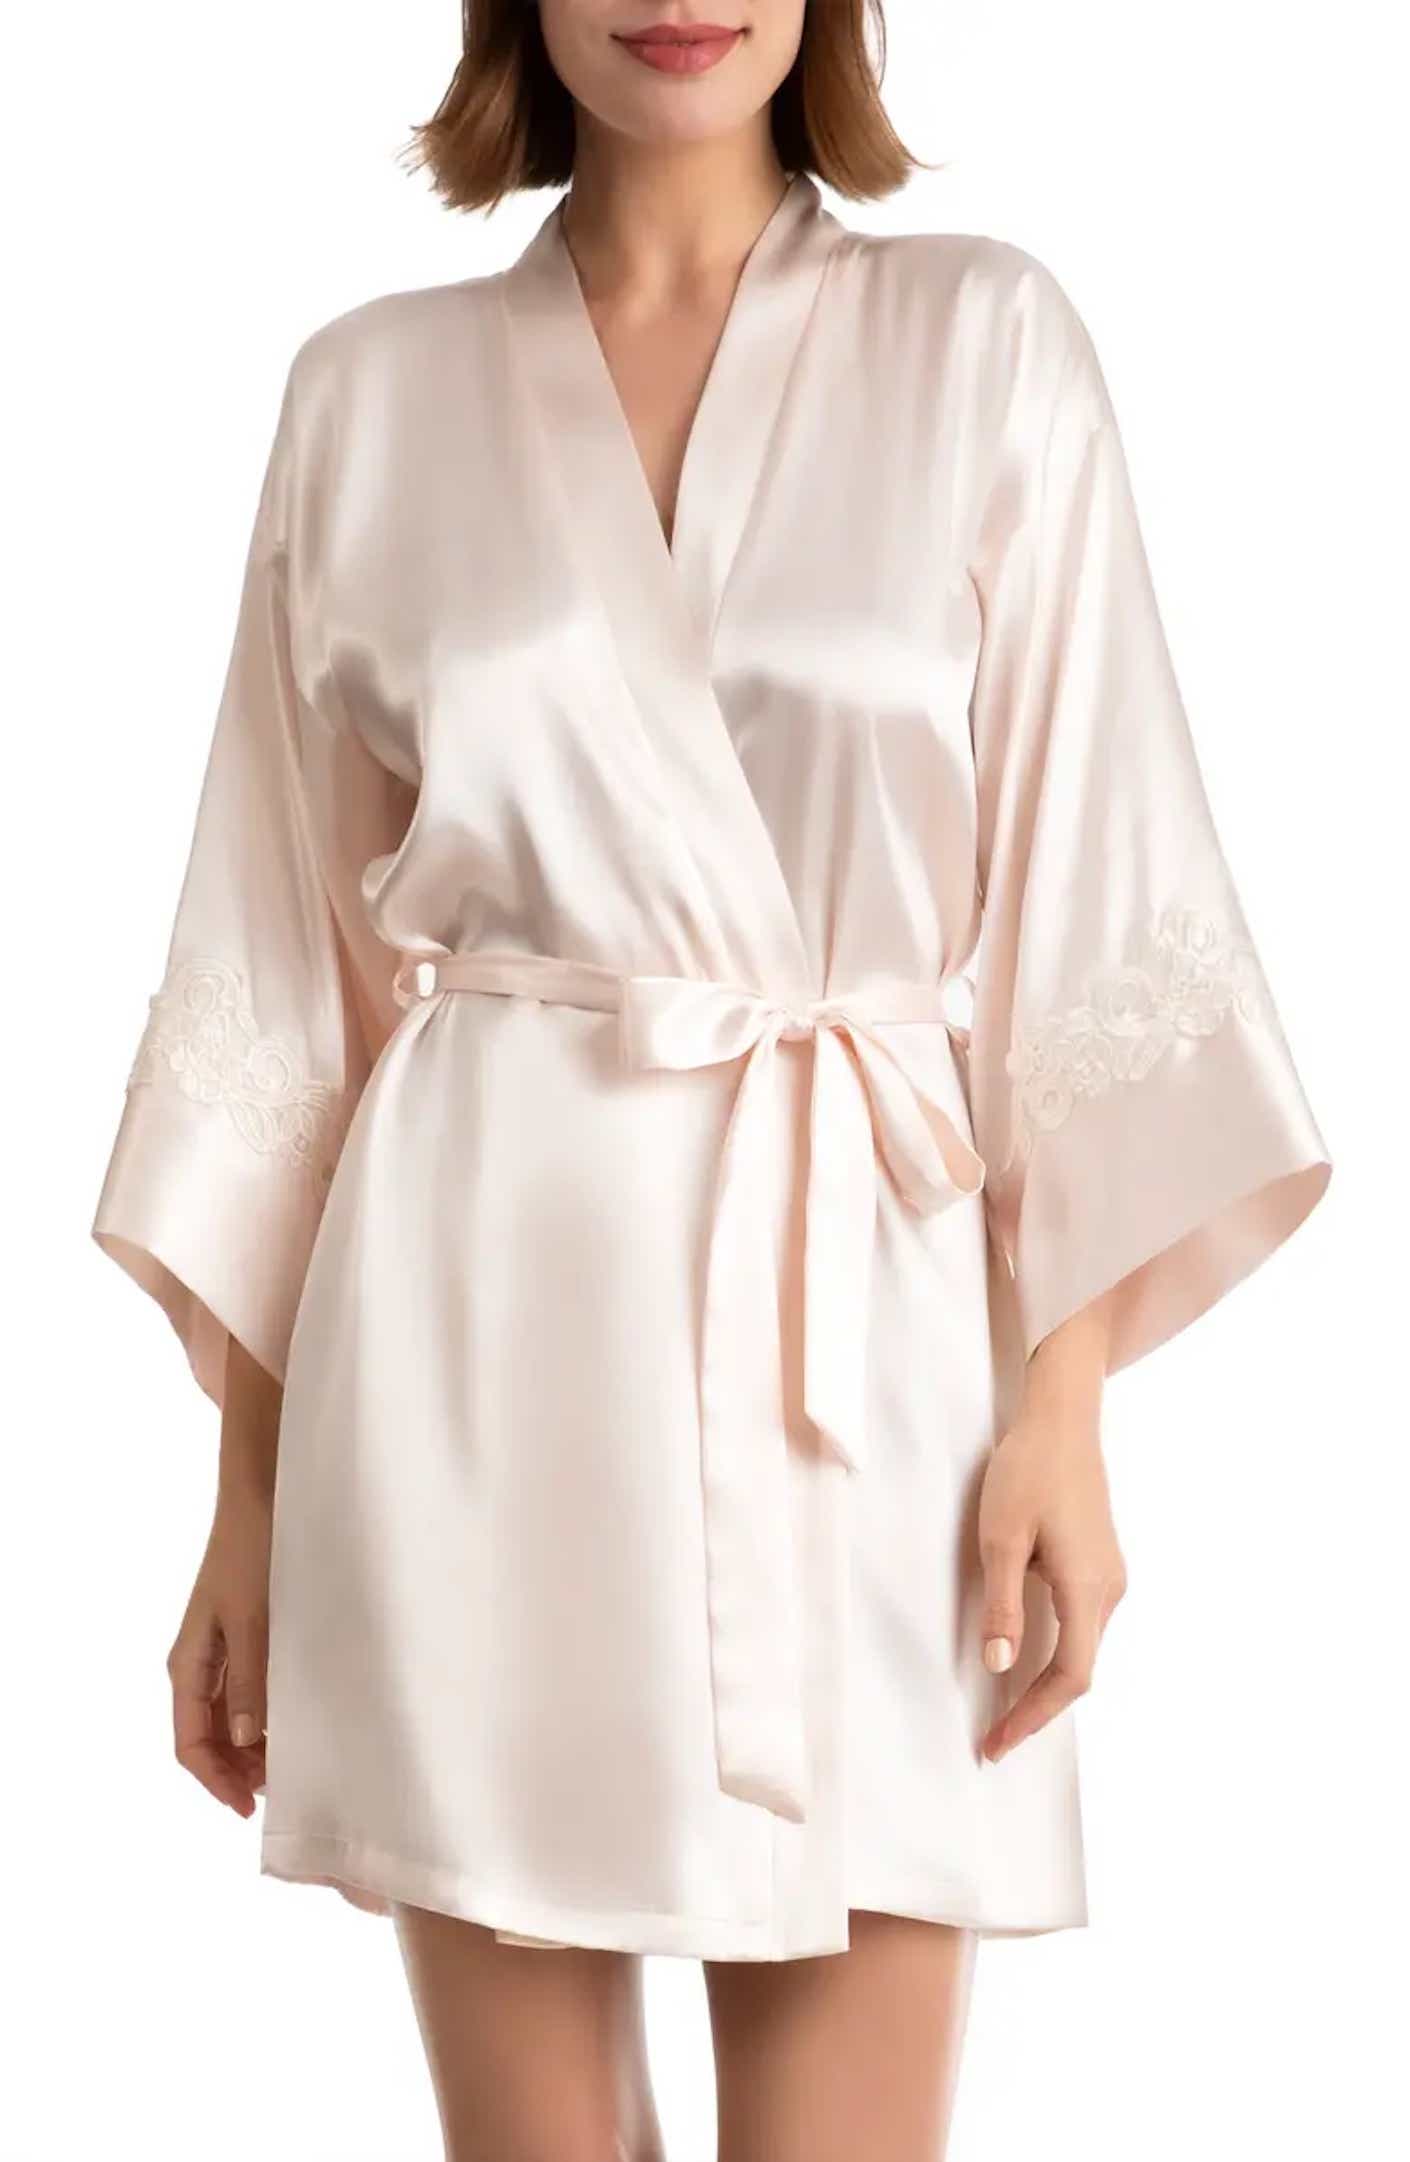 A woman wears a thigh length satin robe in a light peach color in front of a white background.